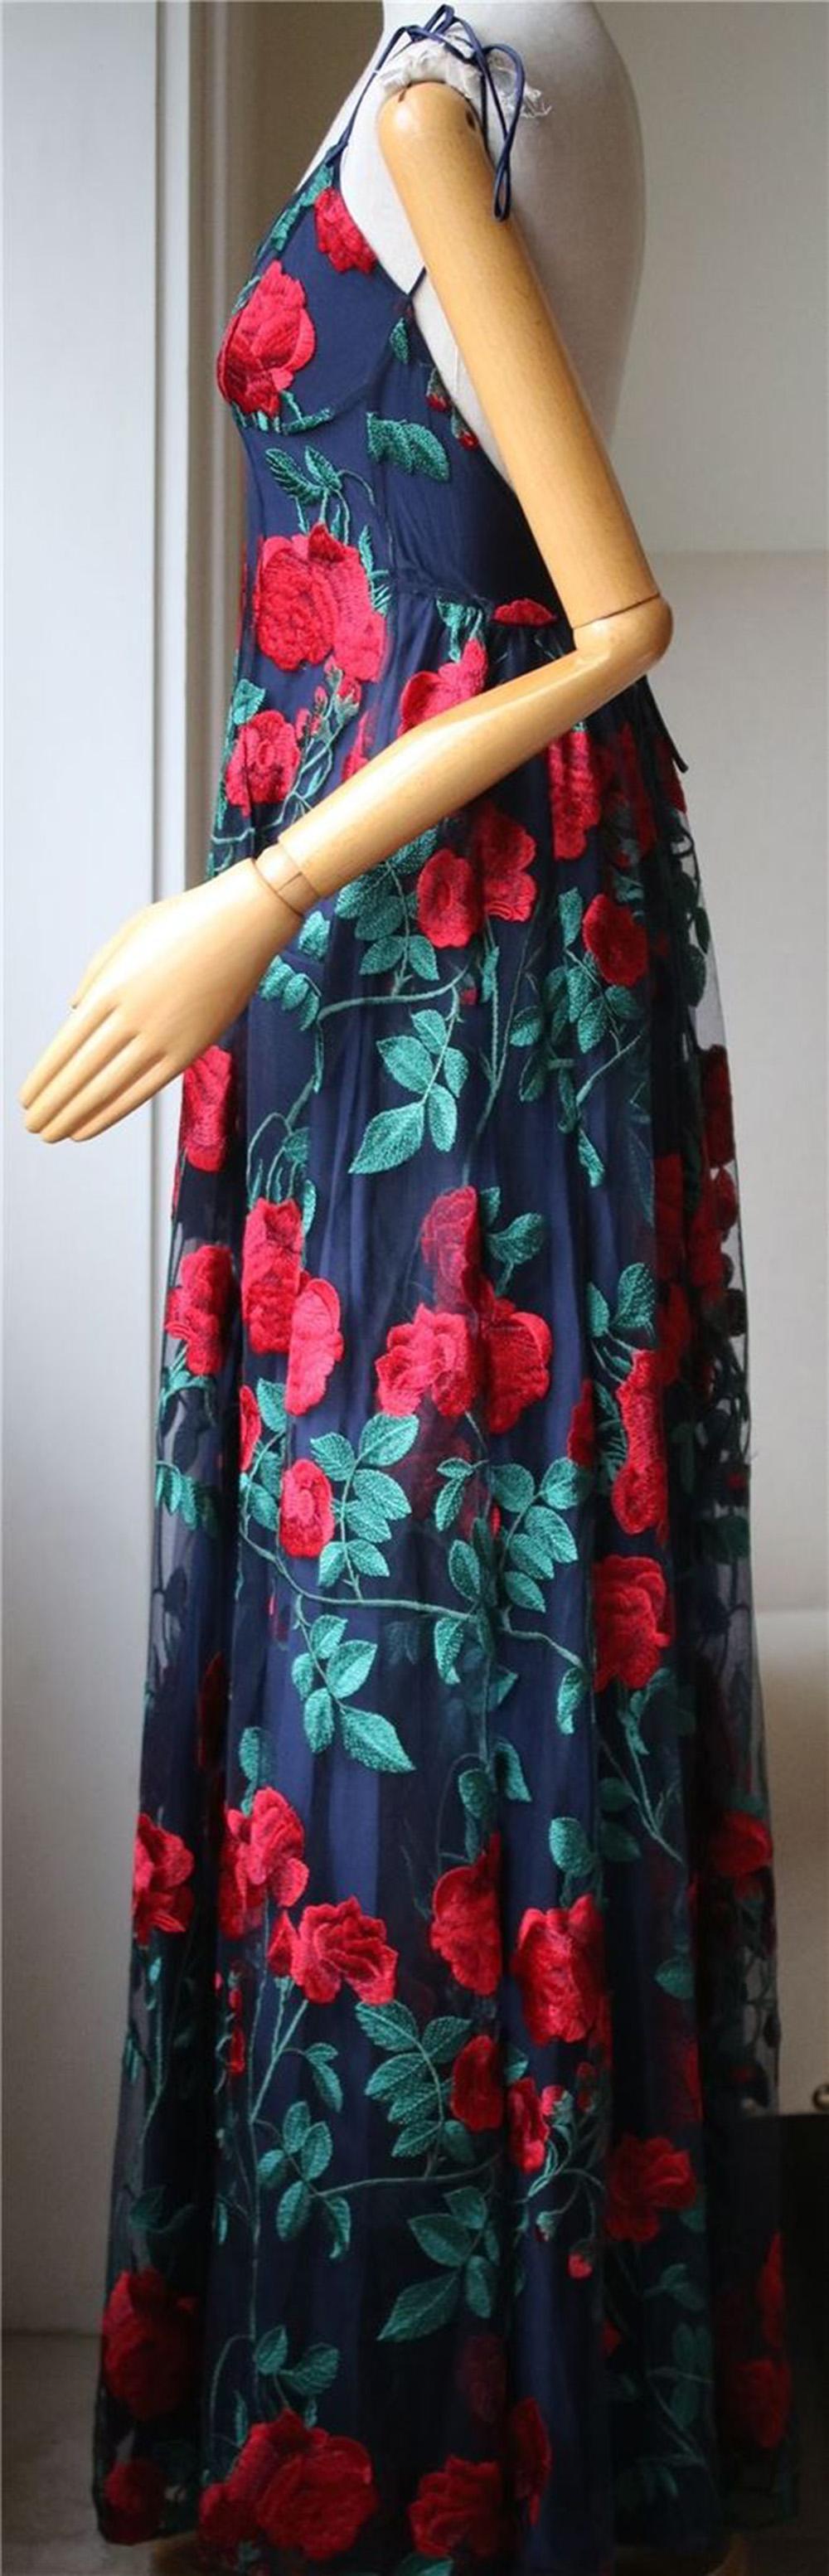 embroidered rose dress